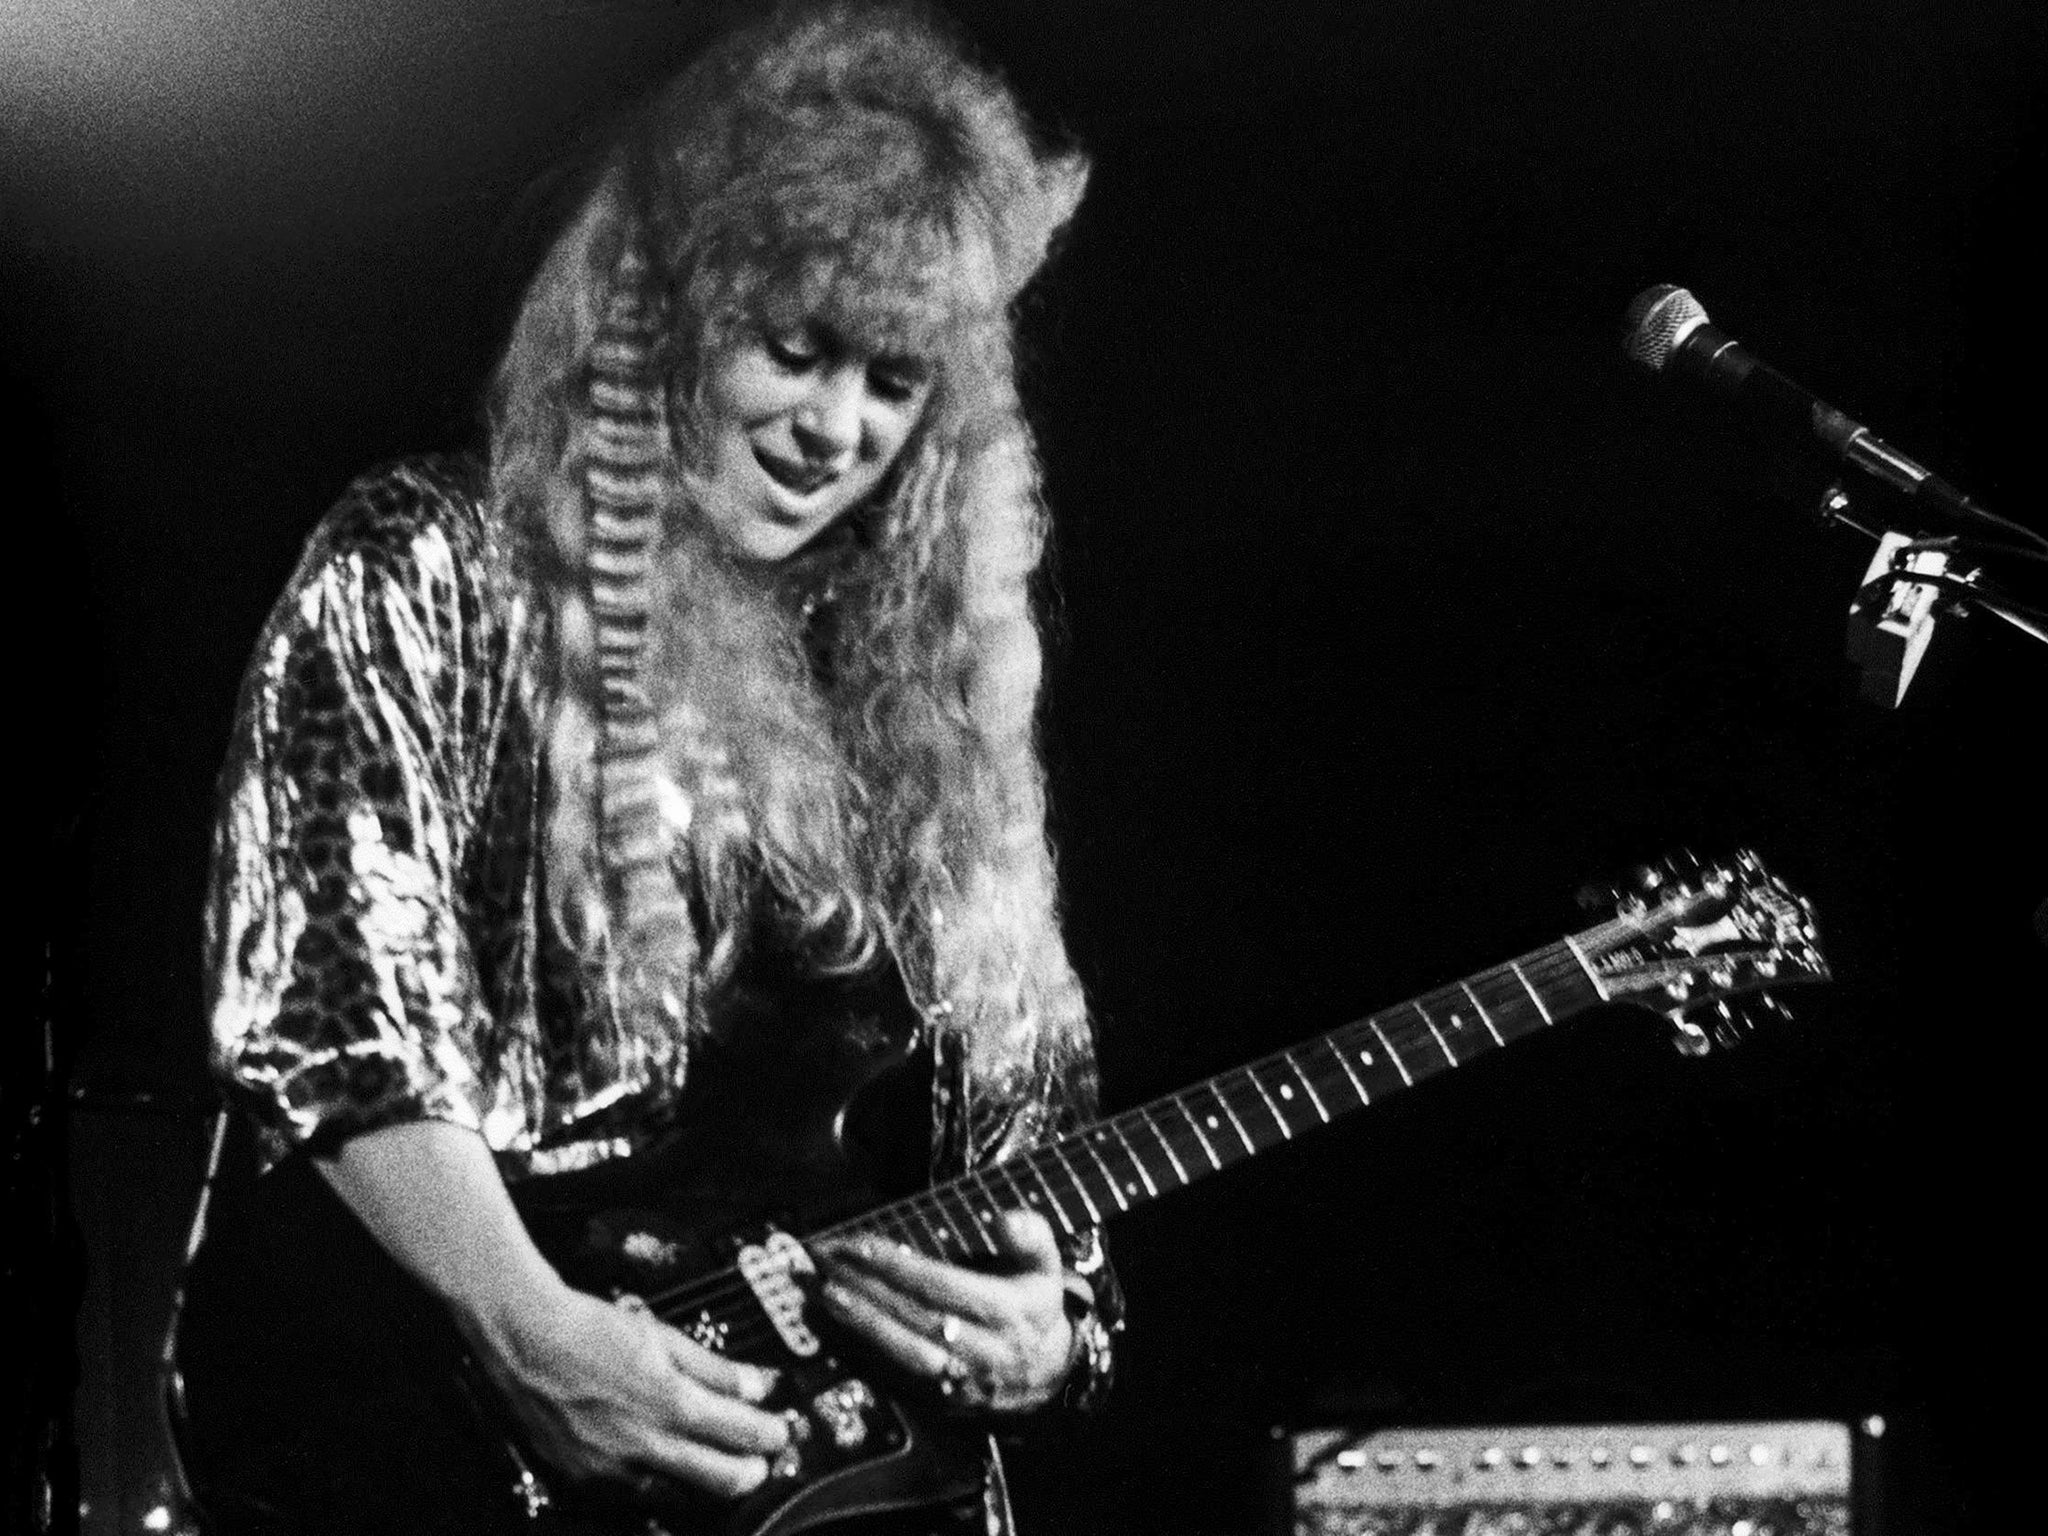 McIlwaine performing at a 1987 album release party in Toronto